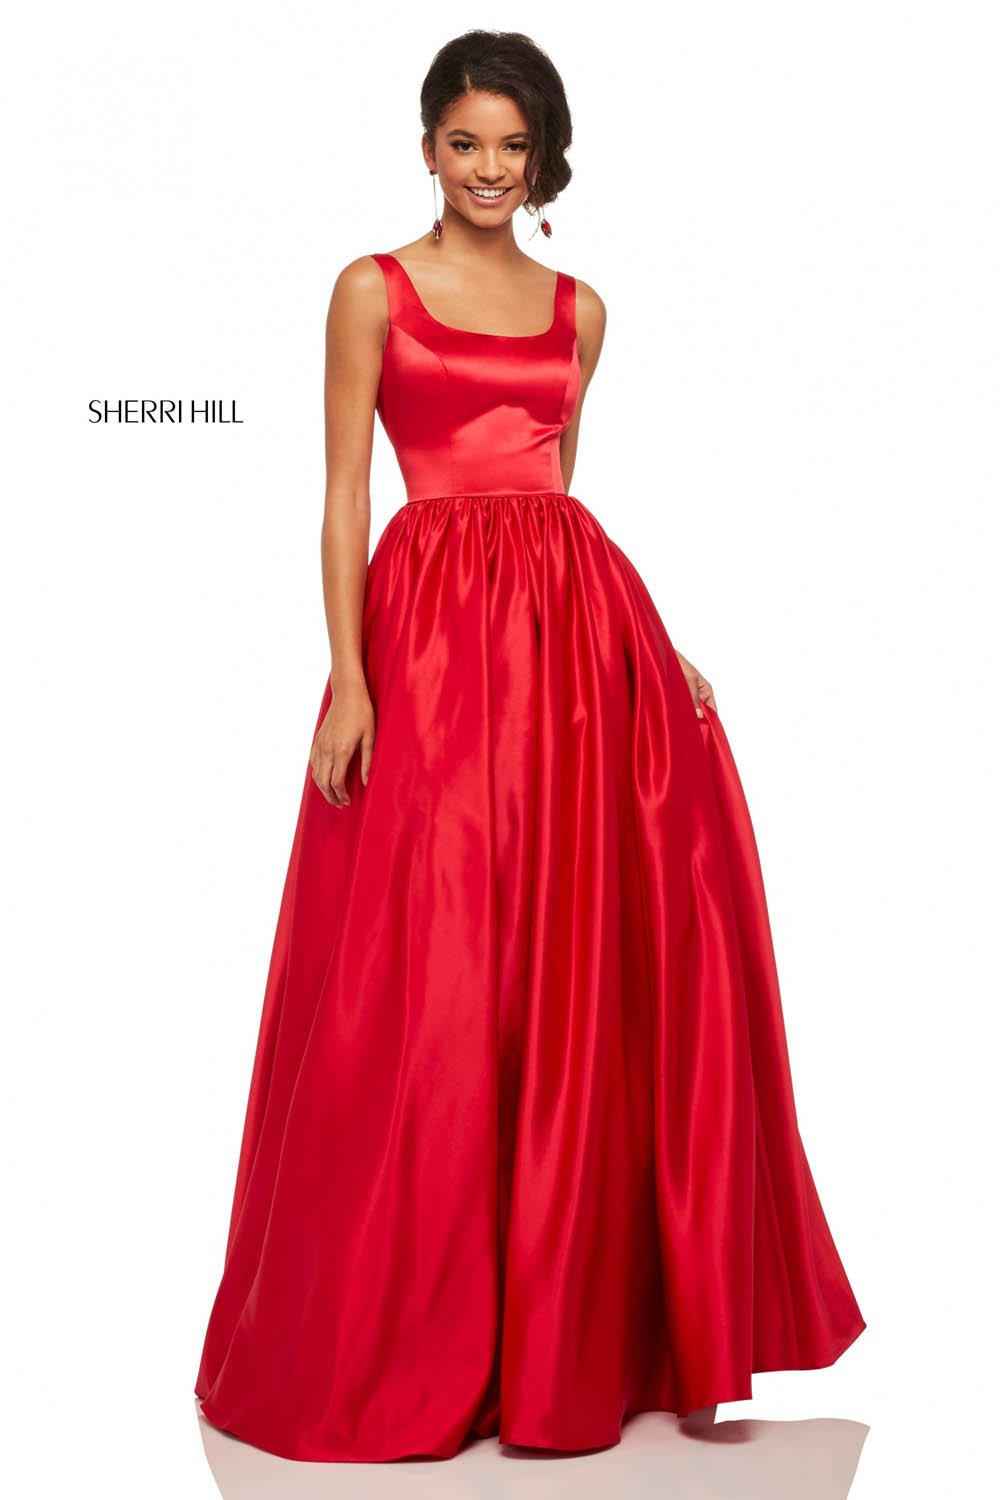 Sherri Hill 52813 dress images in these colors: Black, Emerald, Royal, Red, Ivory, Yellow, Light Blue.